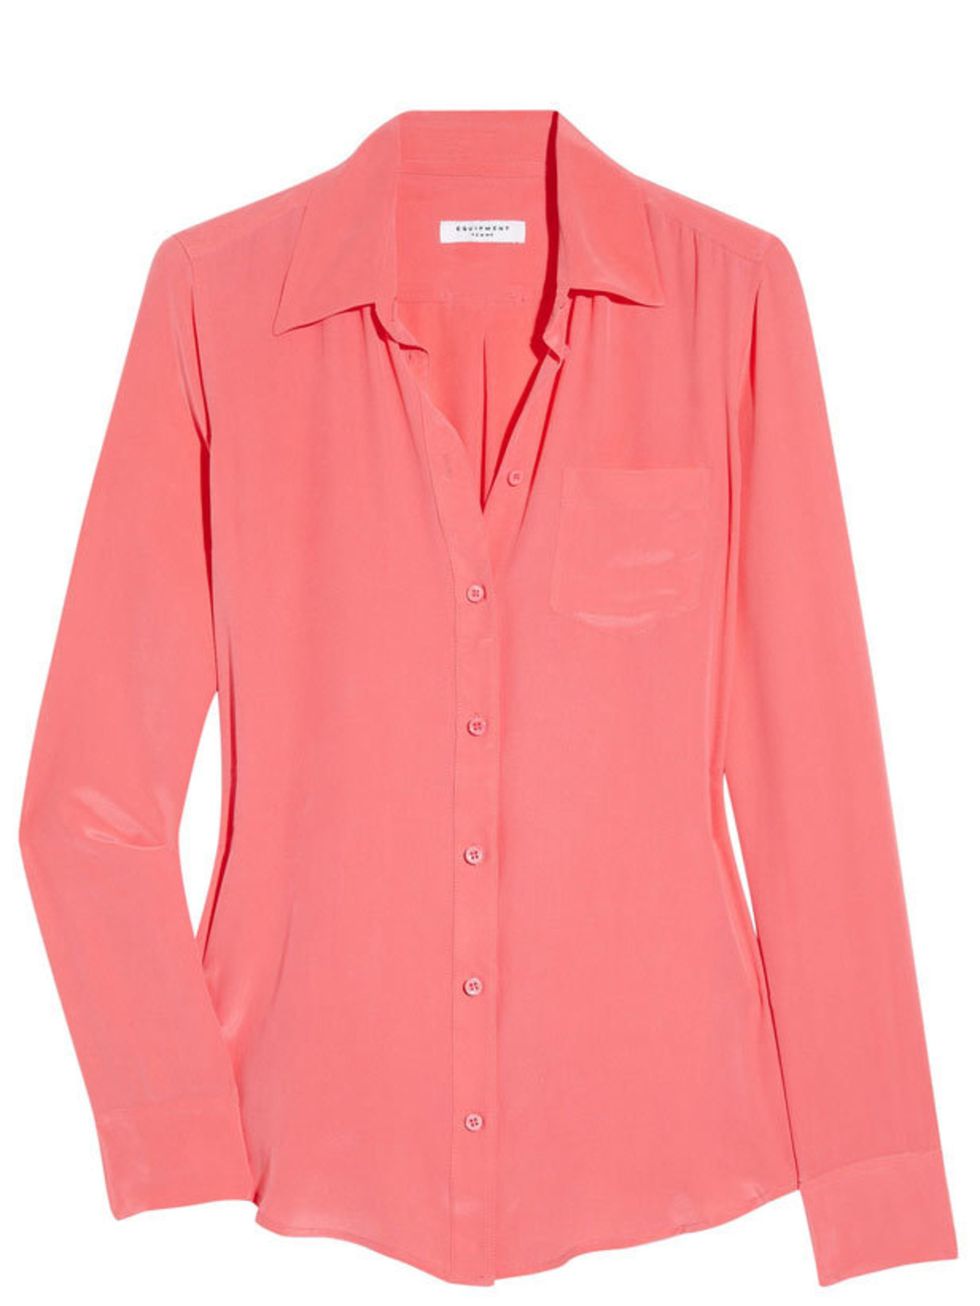 <p>Equipment 'Hard Feelings' crepe shirt, £210, available from <a href="http://www.net-a-porter.com/product/113228">Net-A-Porter</a></p>